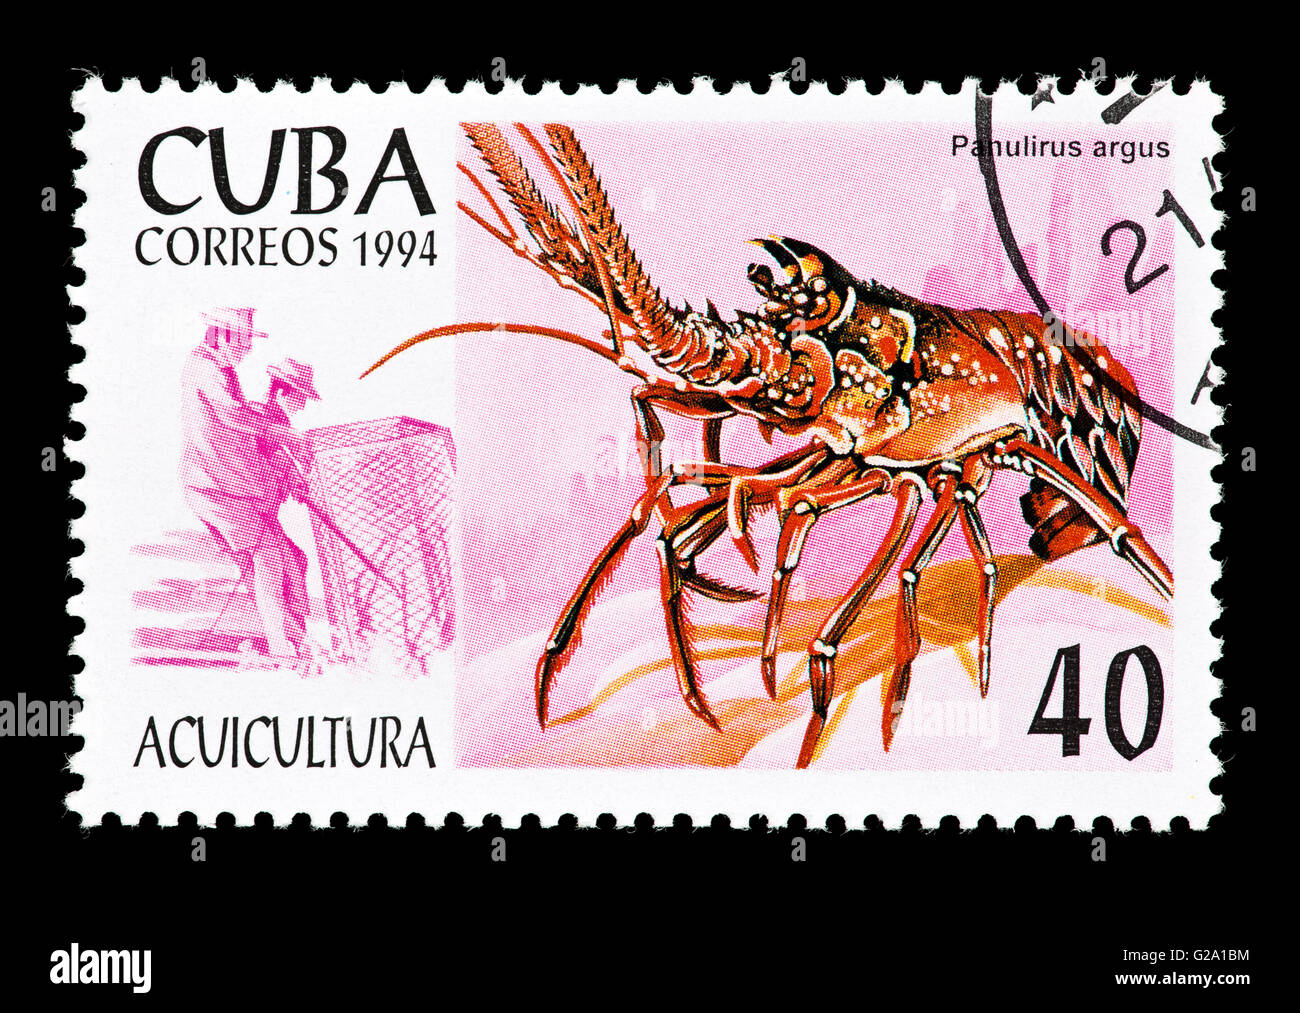 Postage stamp from Cuba depicting a spiny lobster species (Palinurus argus Stock Photo